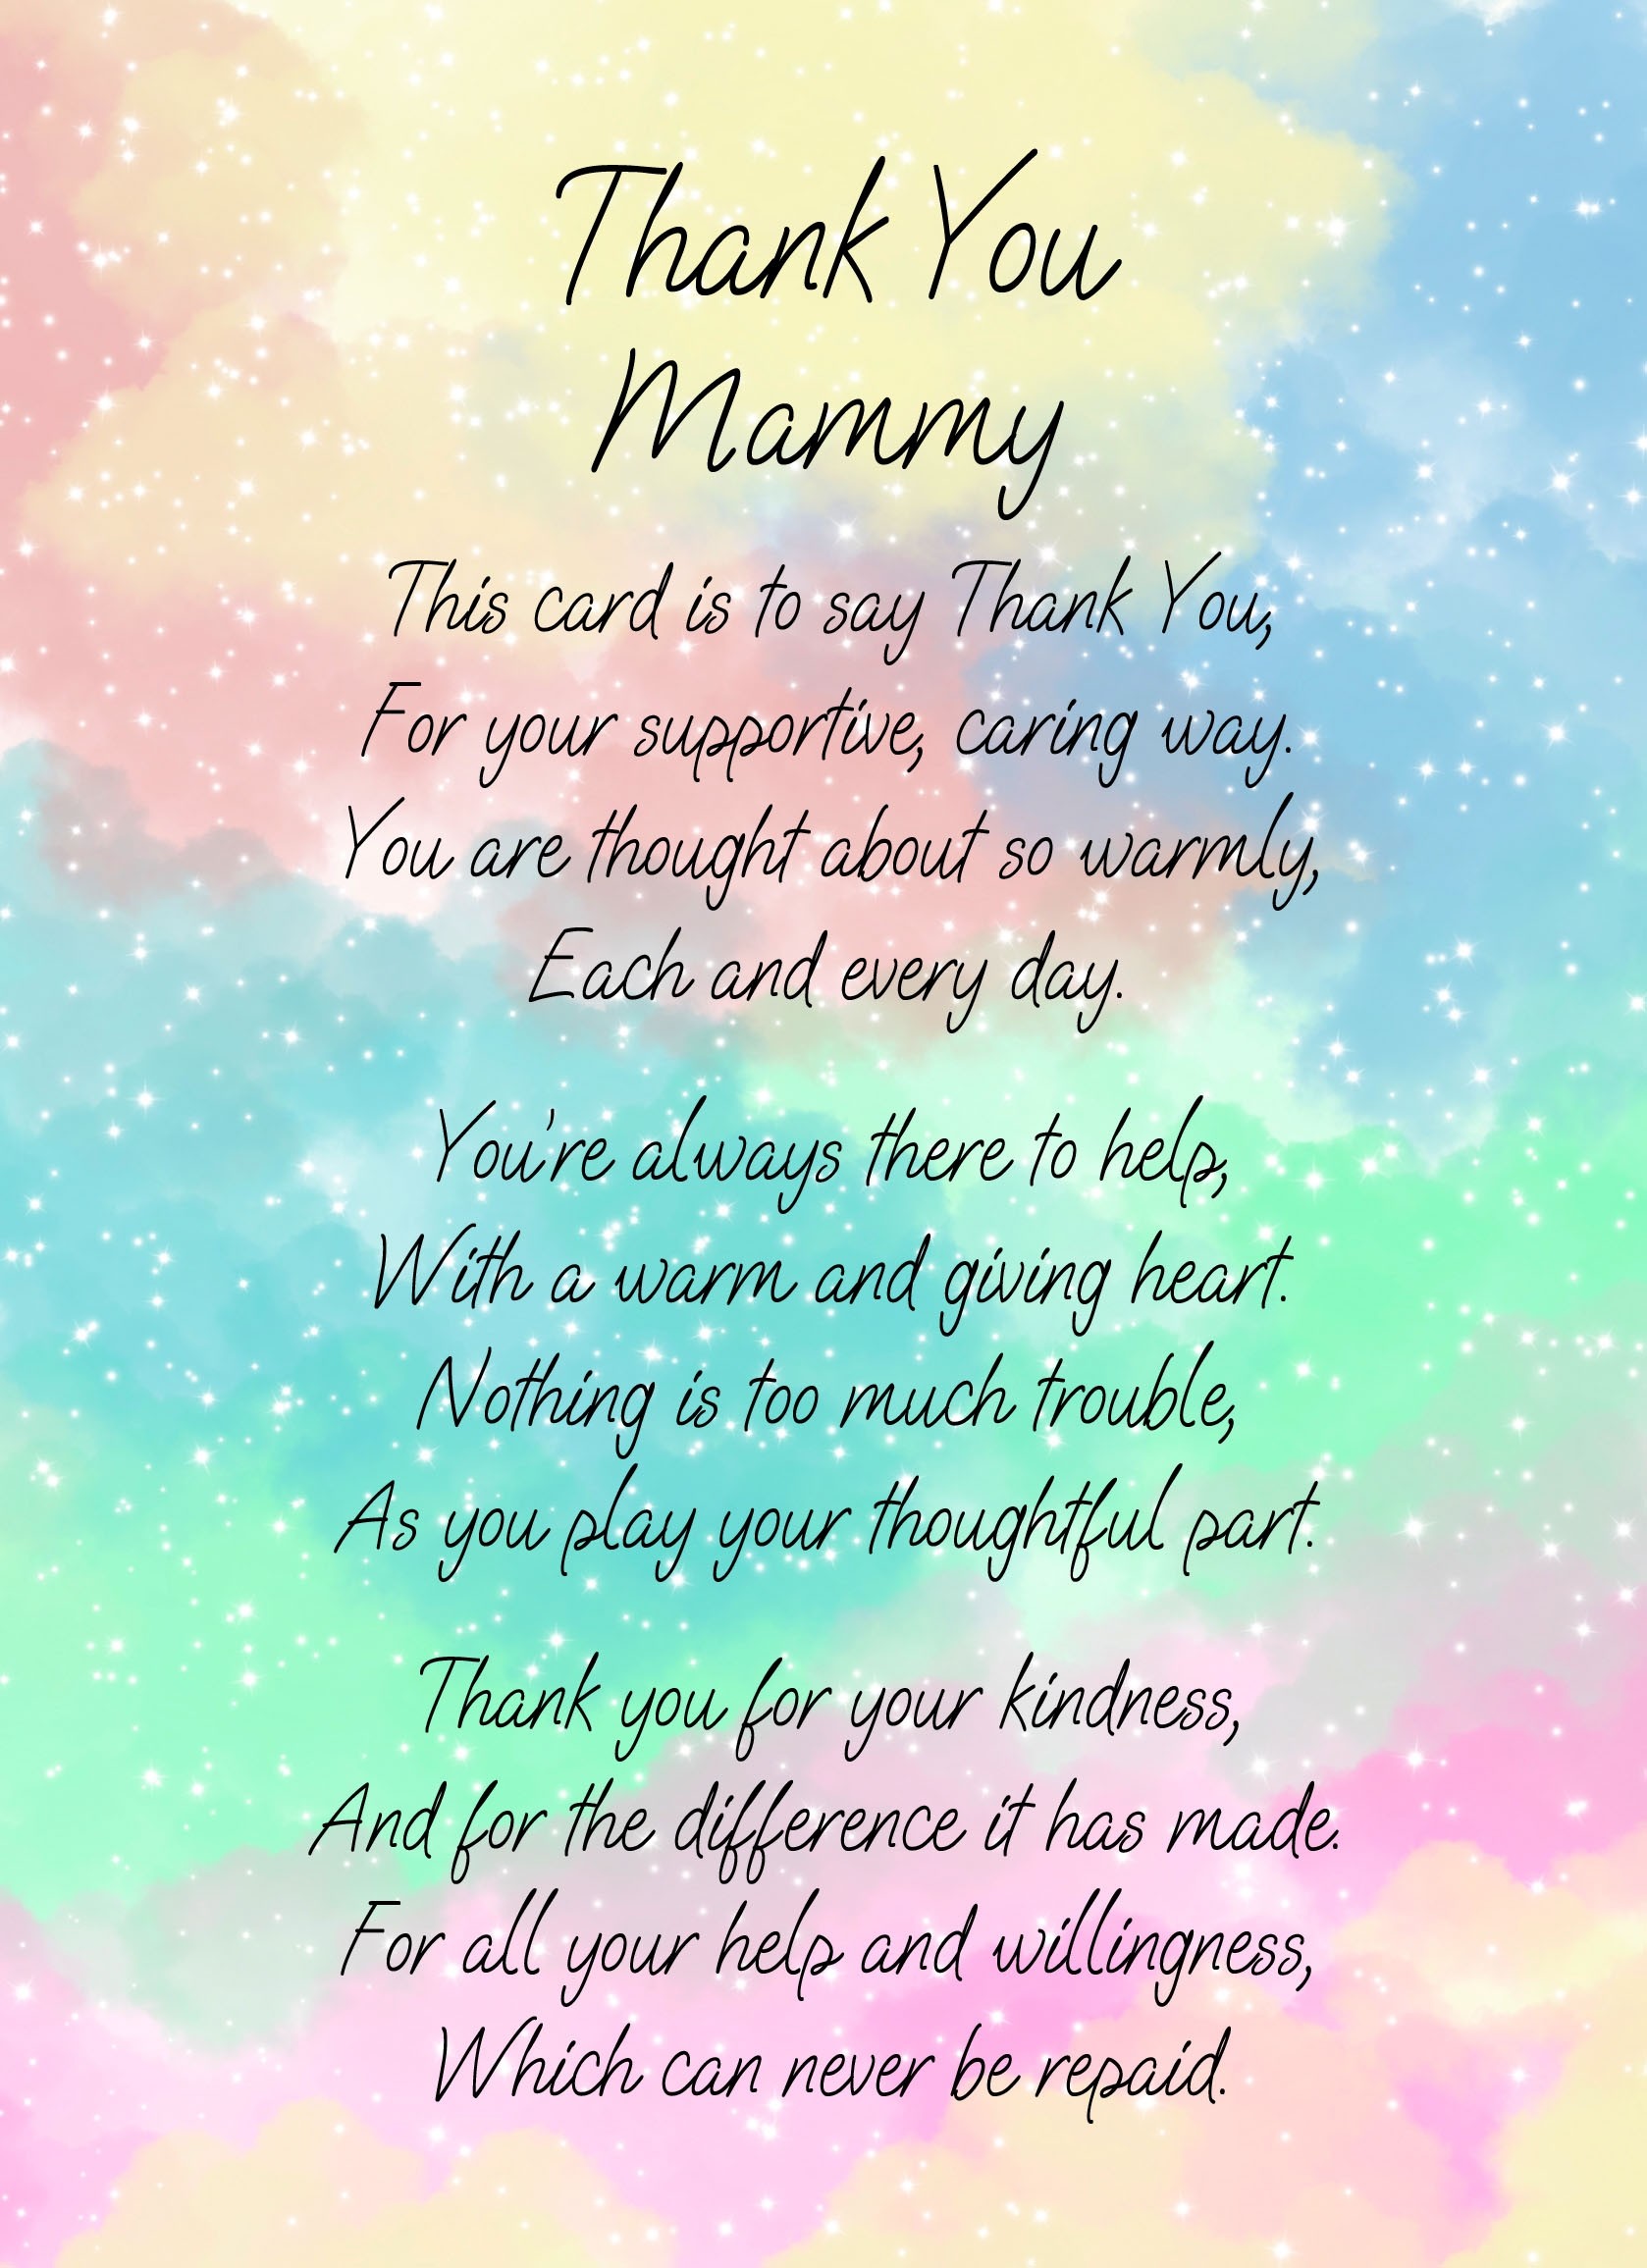 Thank You Poem Verse Card For Mammy